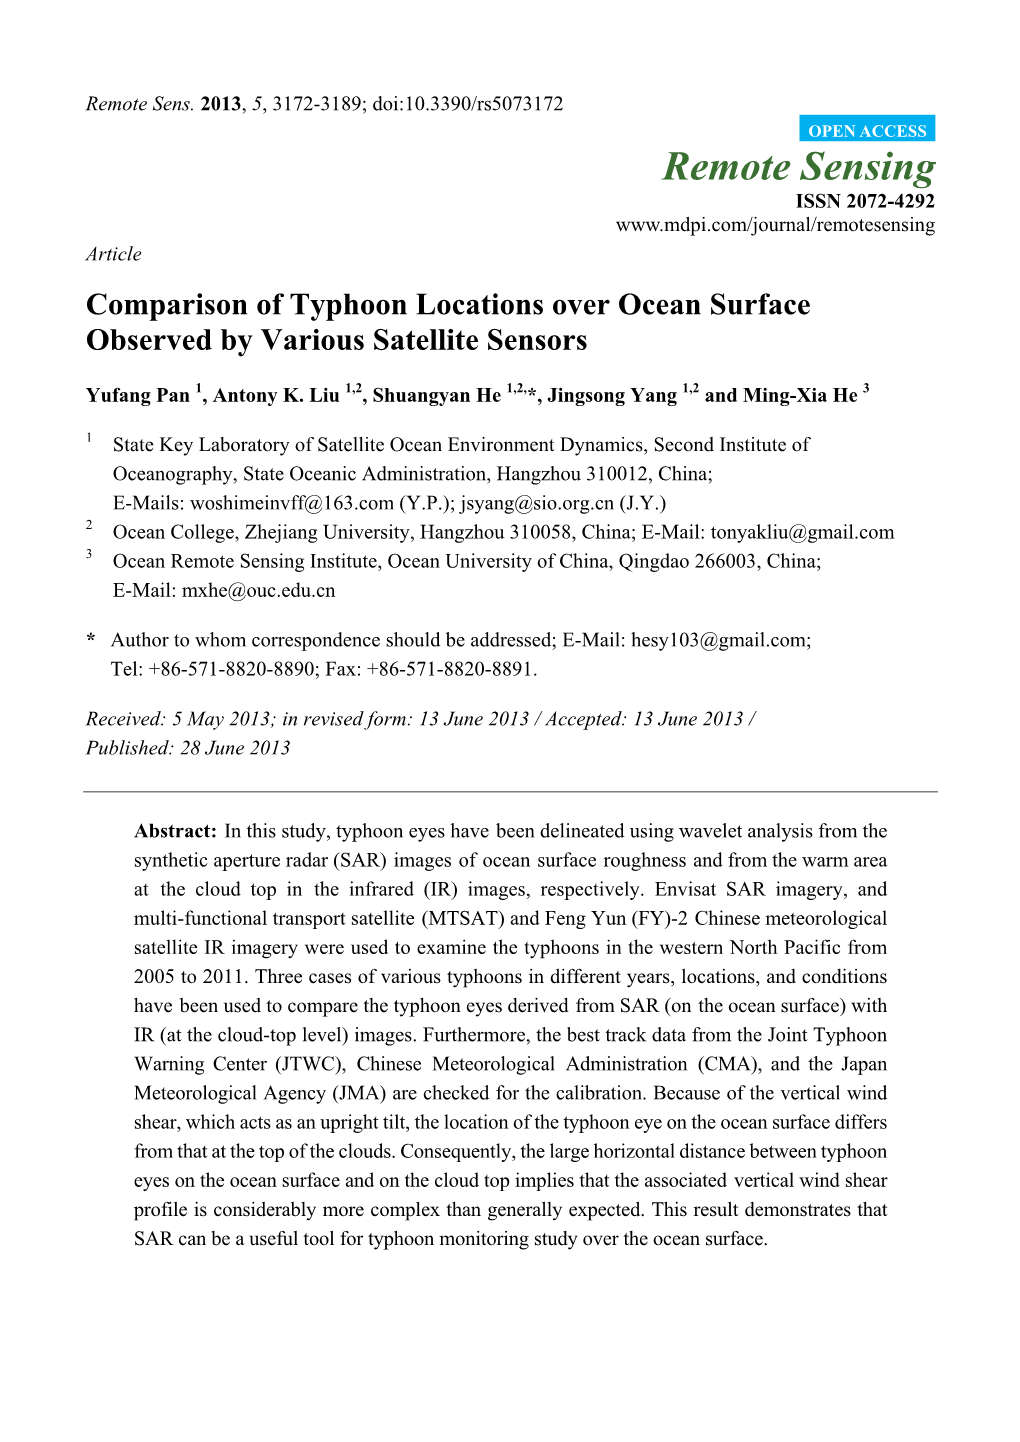 Comparison of Typhoon Locations Over Ocean Surface Observed by Various Satellite Sensors